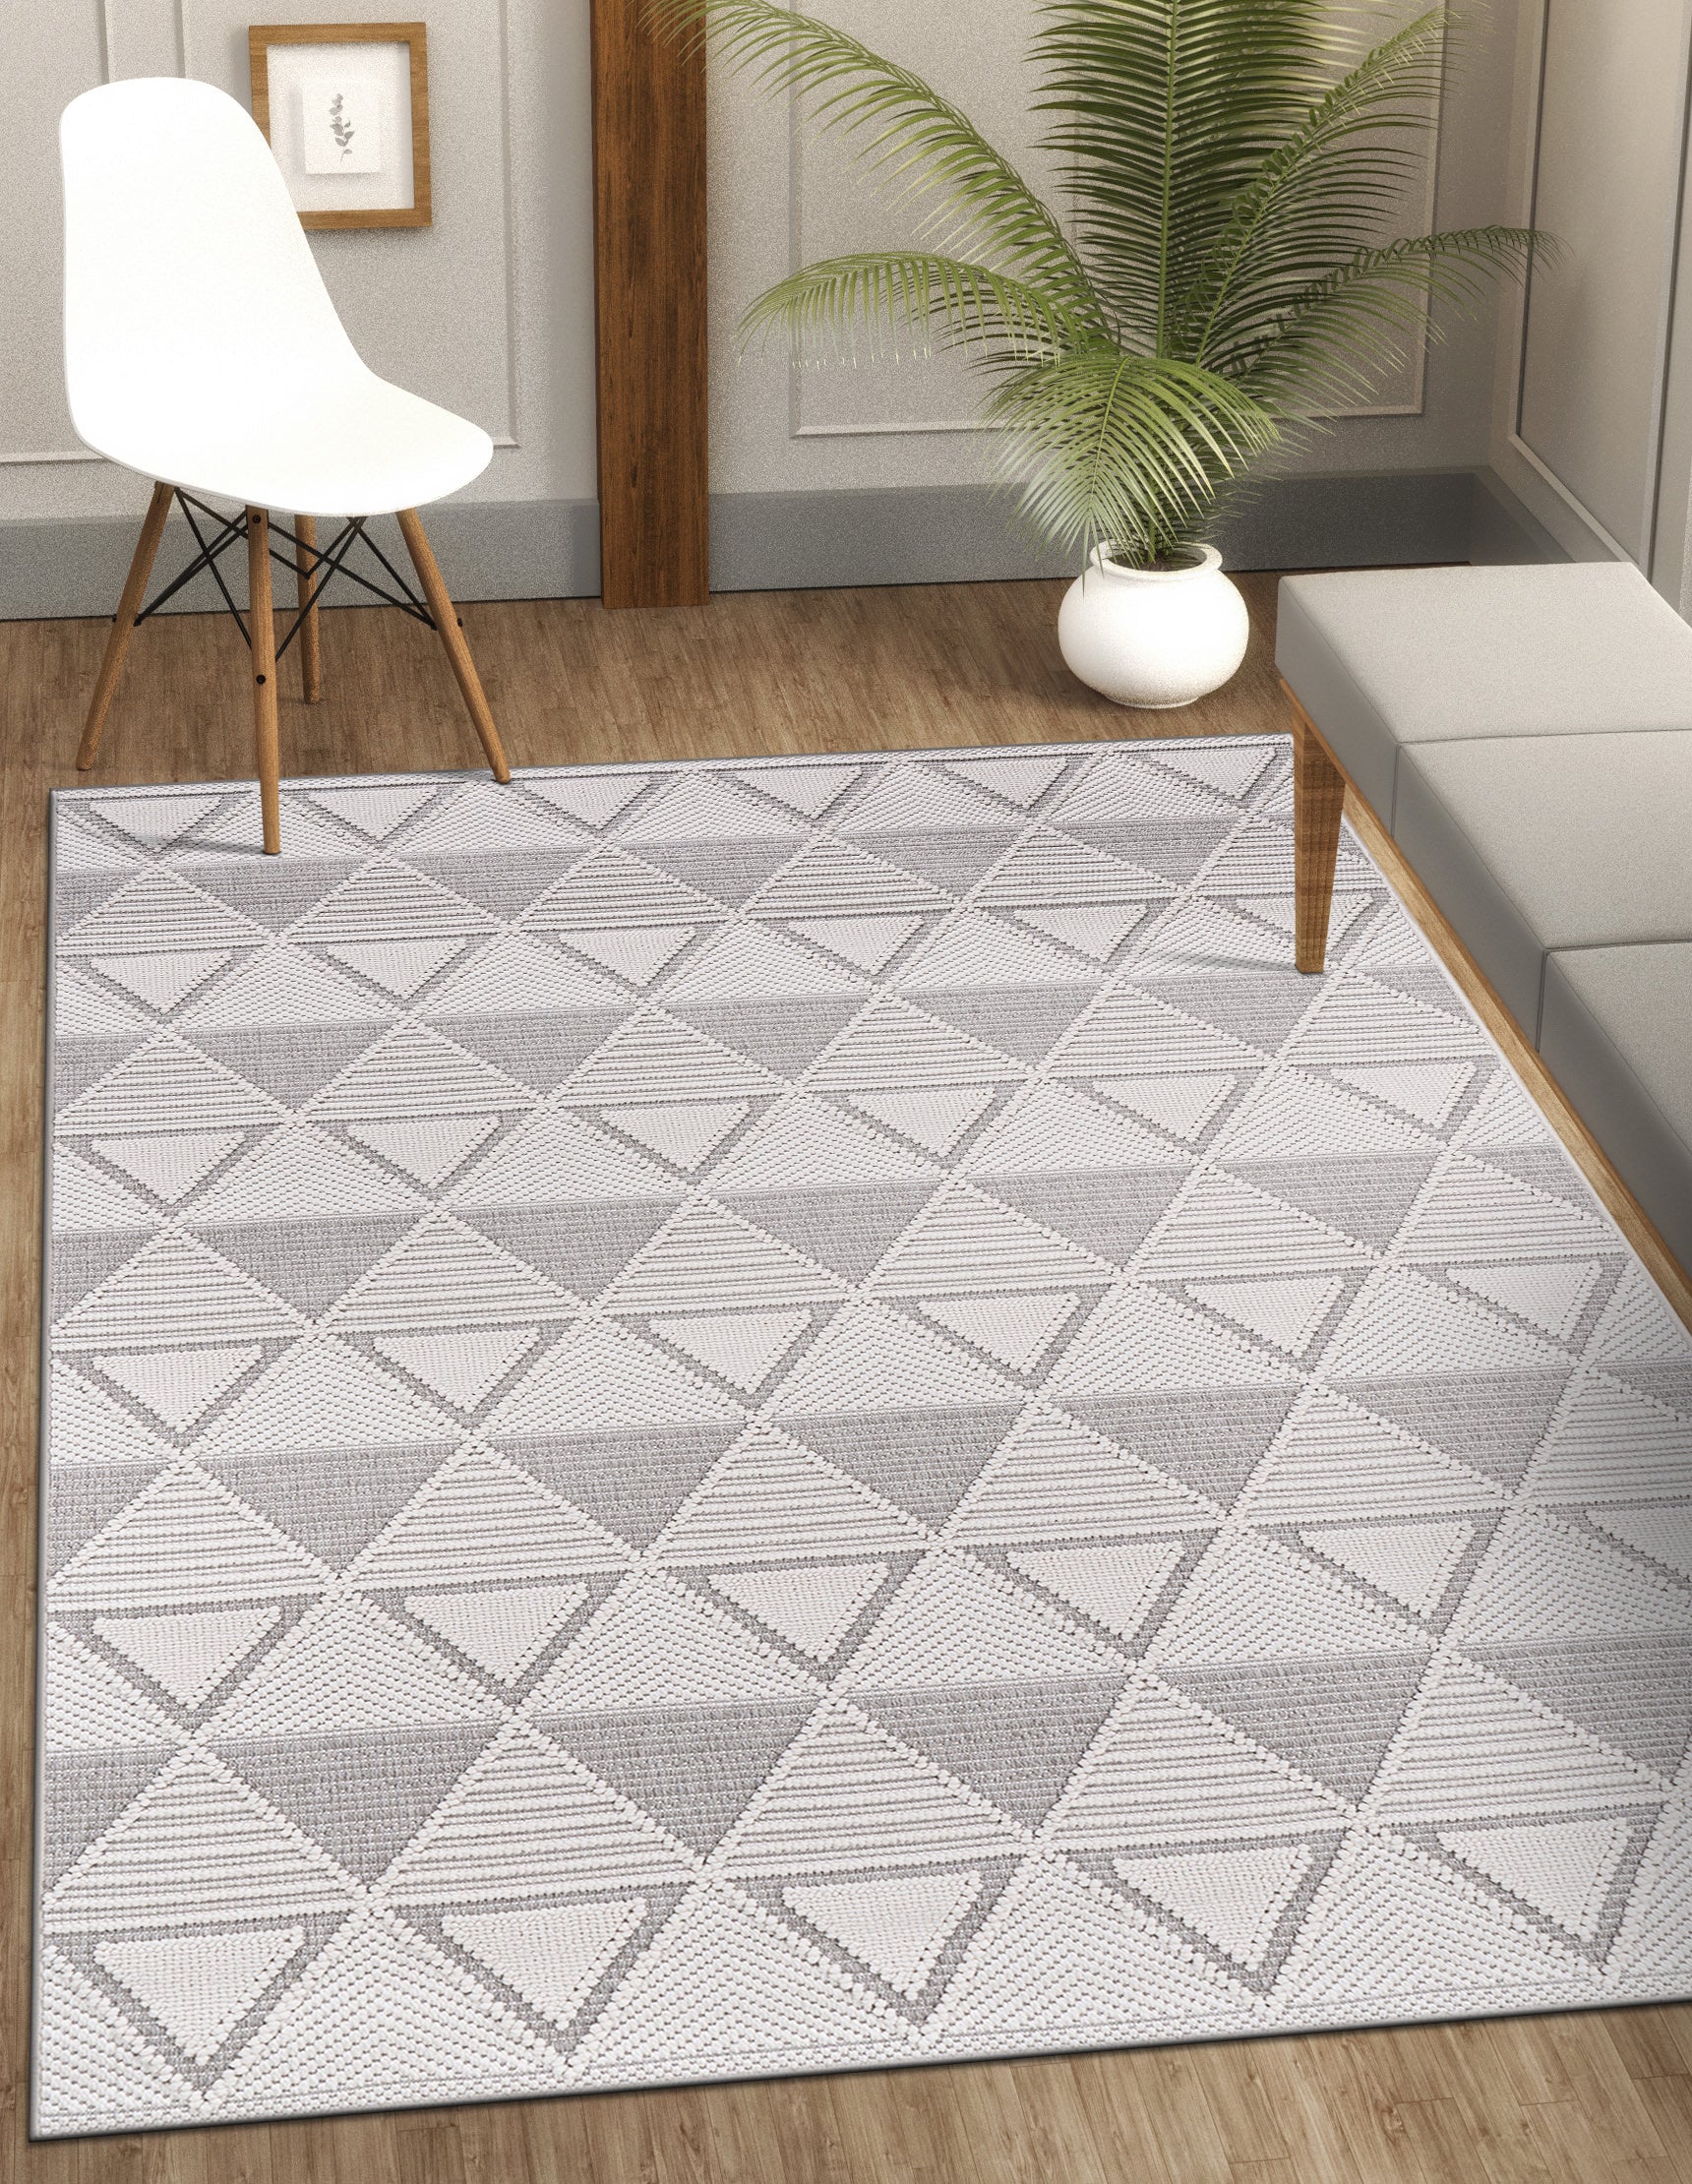 Micro Loop Area Rugs  GY7 - White / Gray